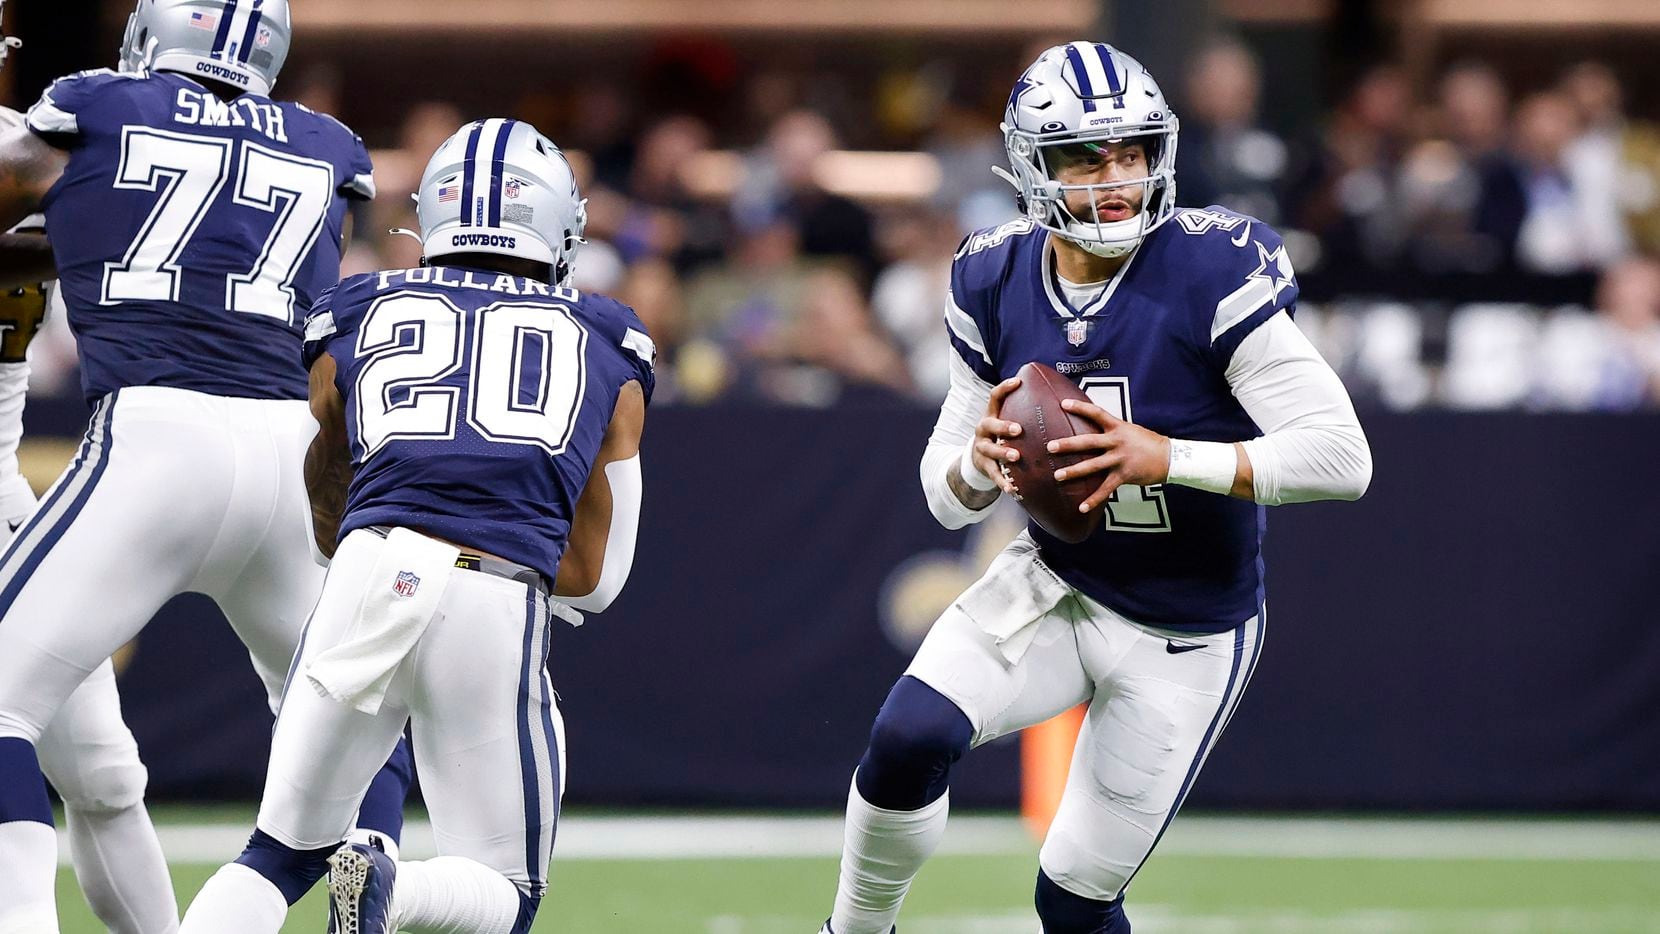 Dallas Cowboys quarterback Dak Prescott (4) fakes the handoff to running back Tony Pollard (20), rolling out of the pocket against the New Orleans Saints at the Caesars Superdome in New Orleans, Louisiana December 2, 2021.